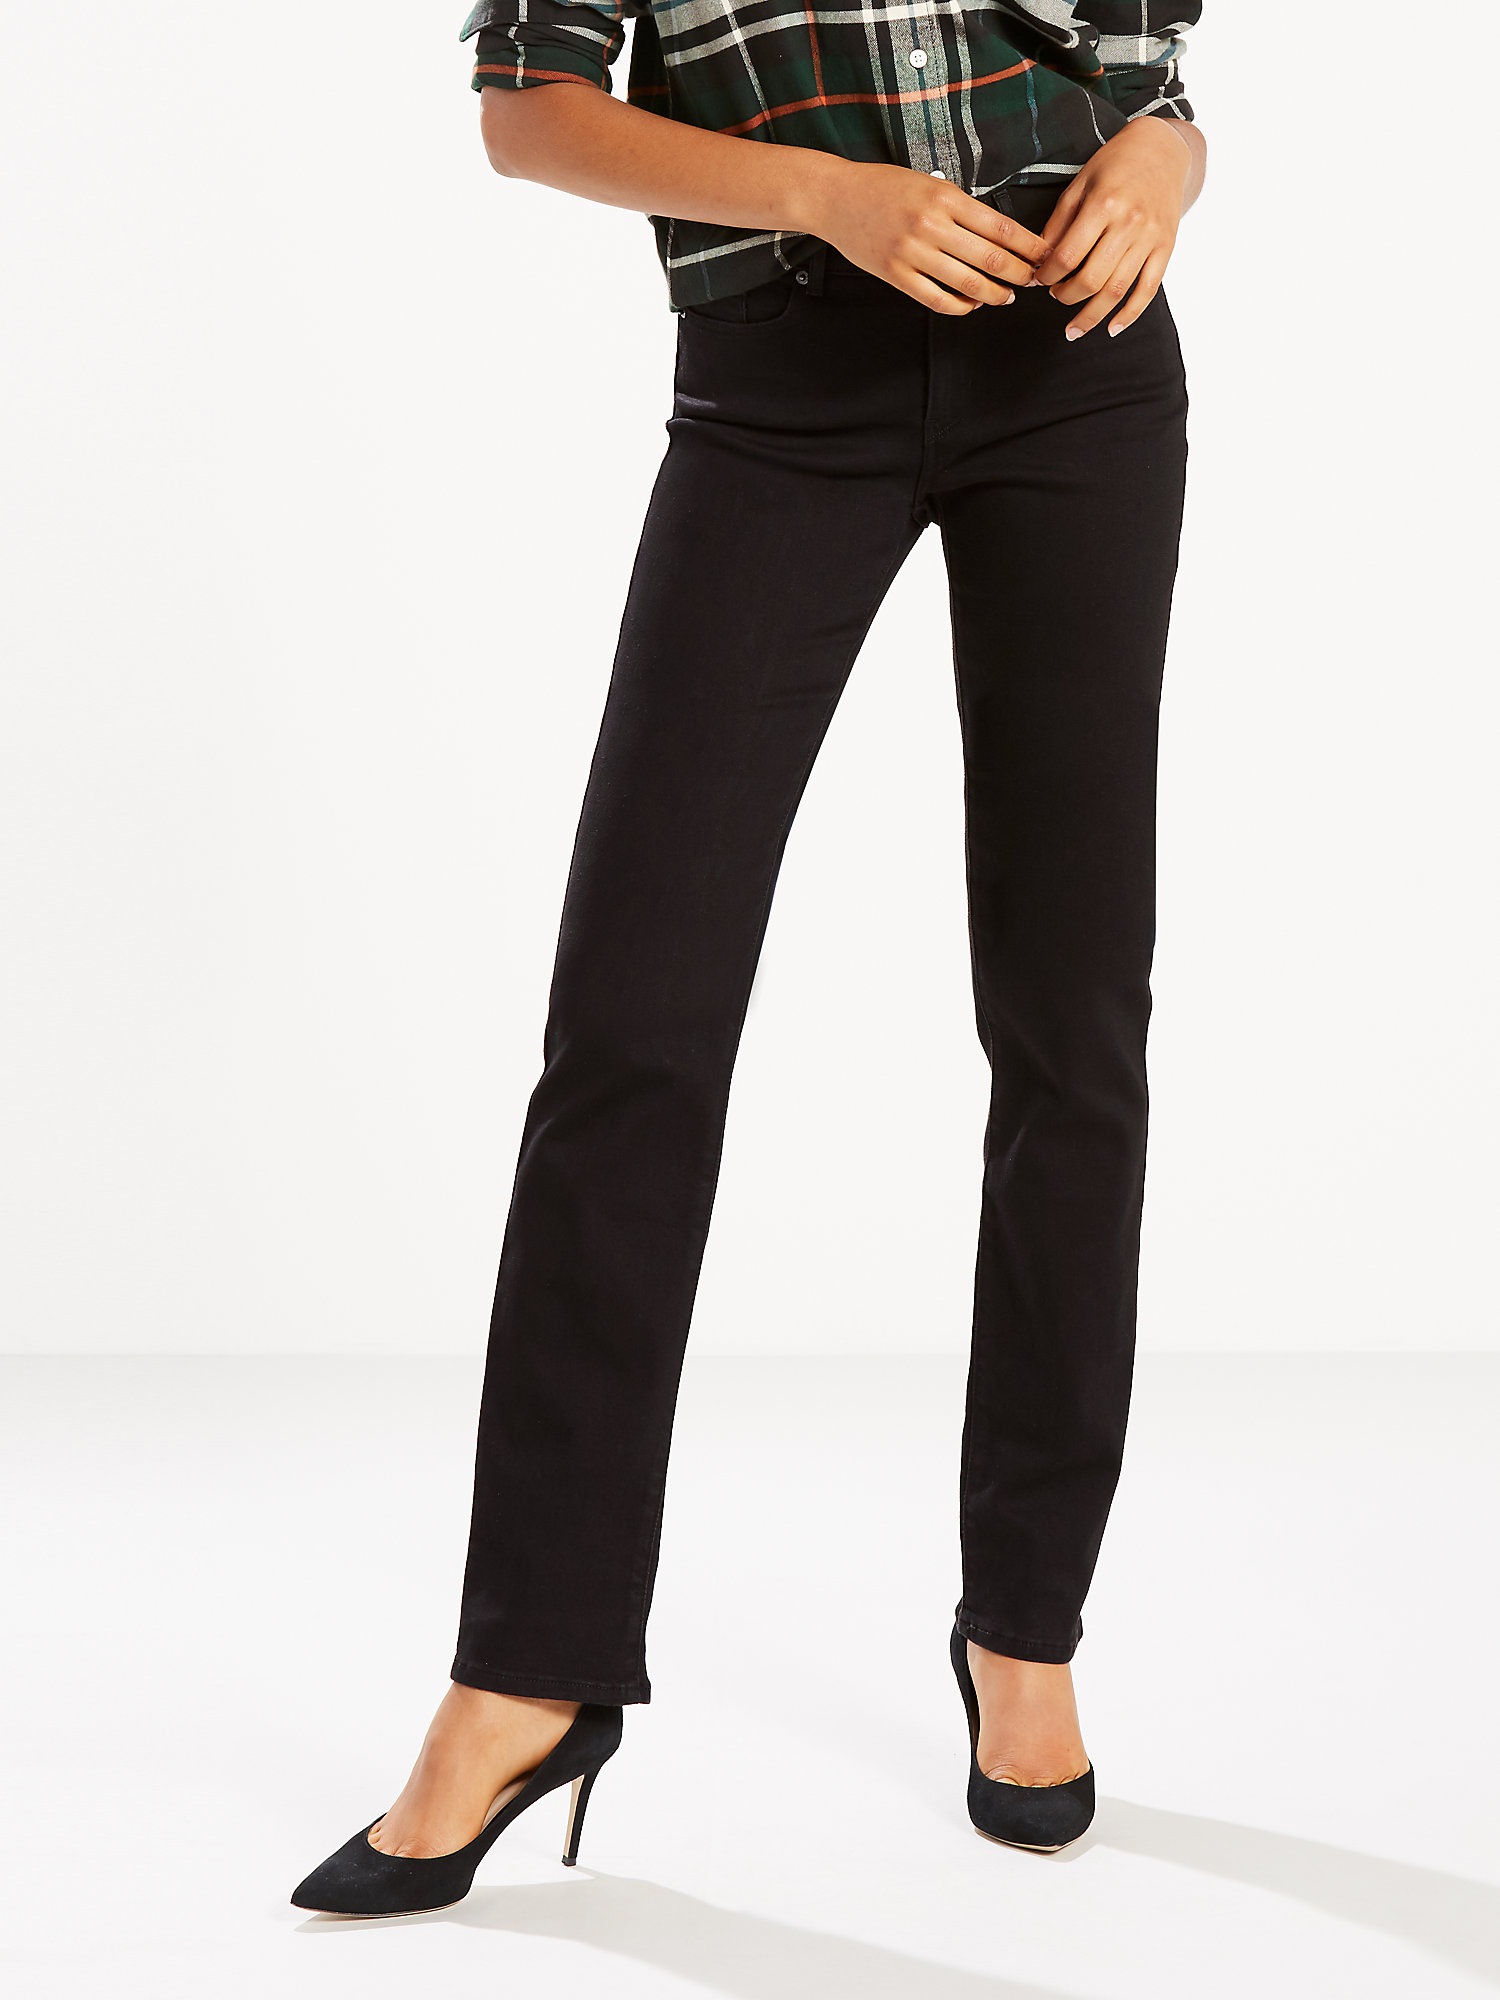 Levi’s Original Red Tab Women's Classic Straight Fit Jeans - image 1 of 7